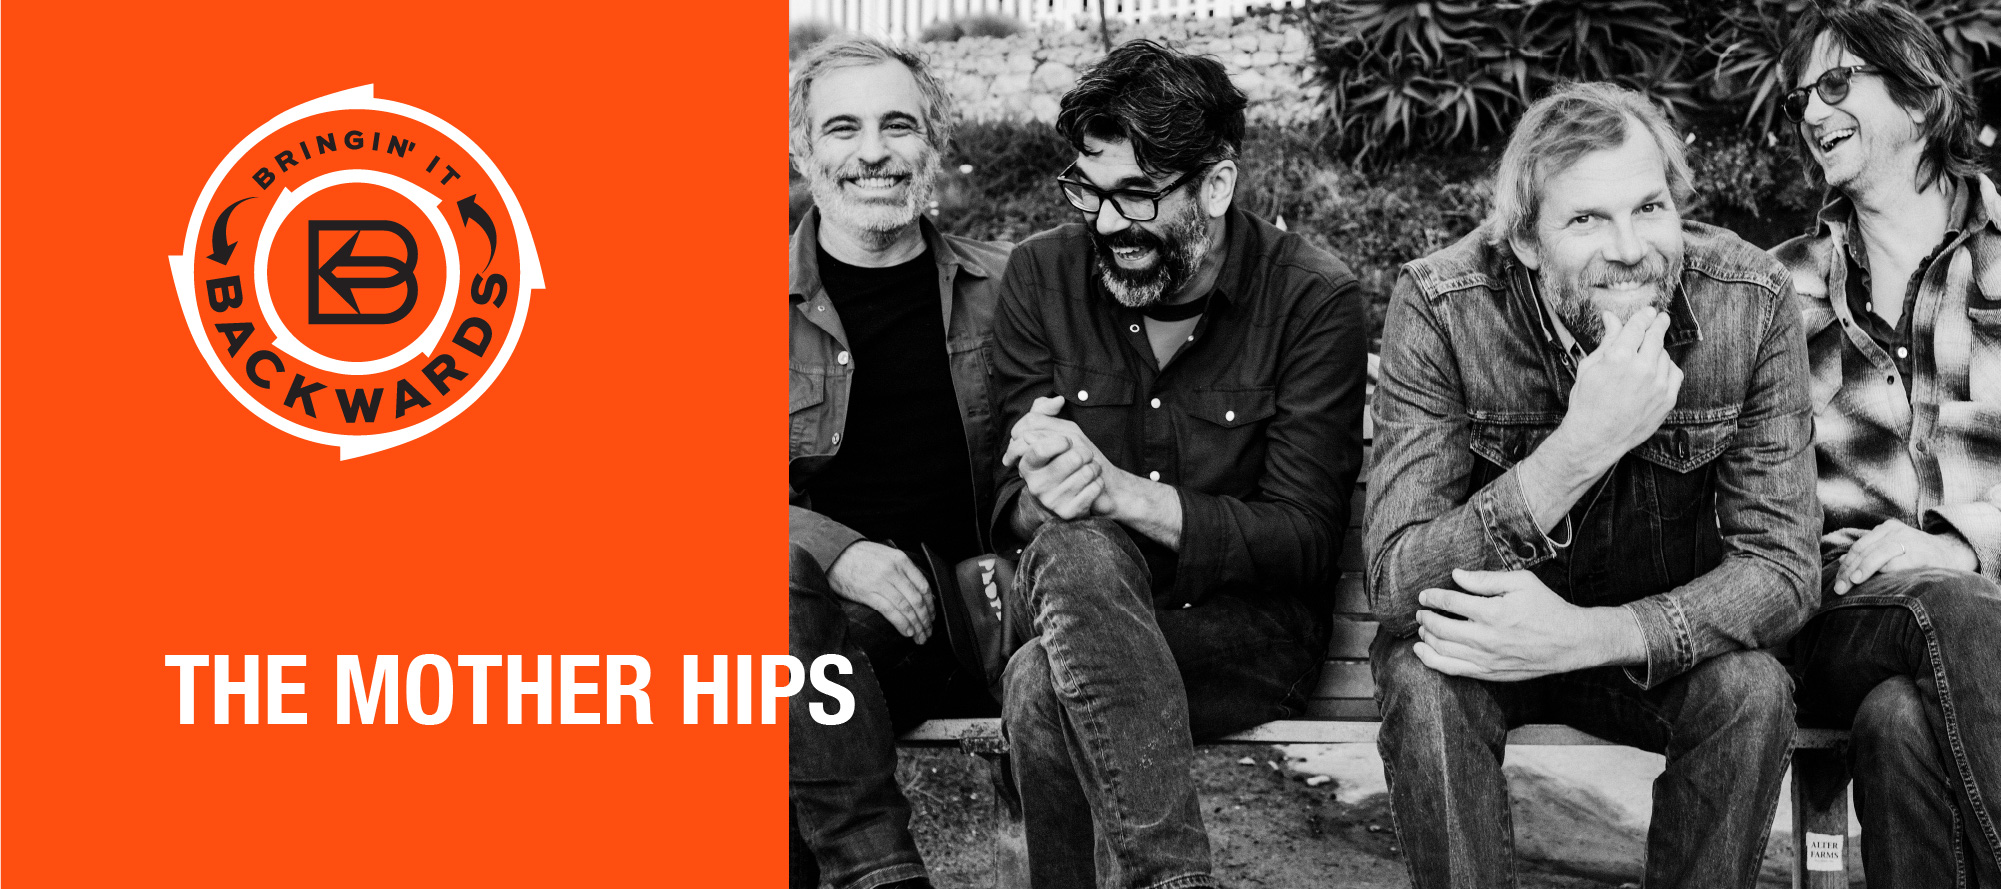 Bringin’ it Backwards: Interview with The Mother Hips